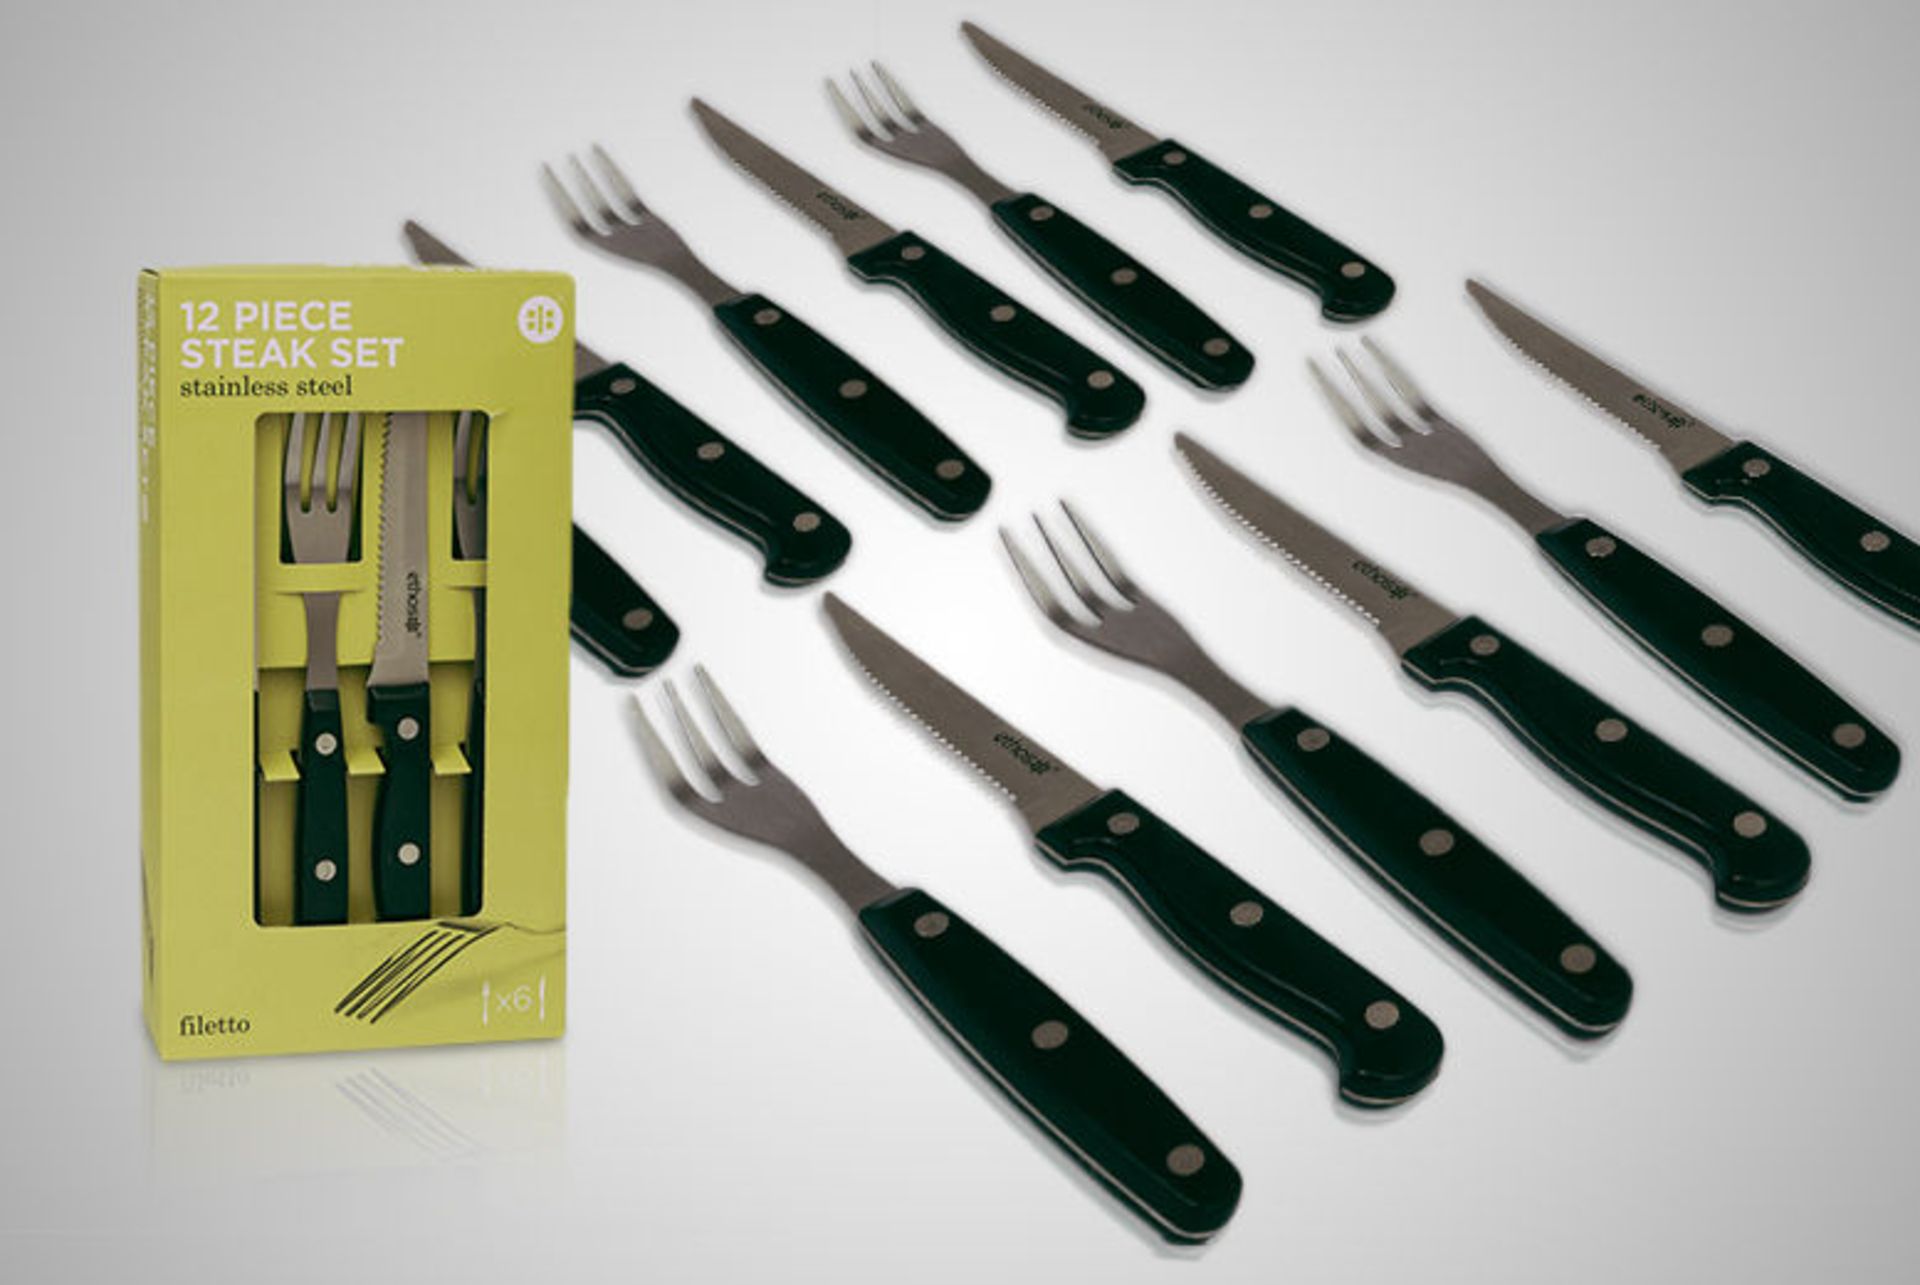 V Brand New 12 Piece Filetto Stainless Steel Steak Knife and Fork Set